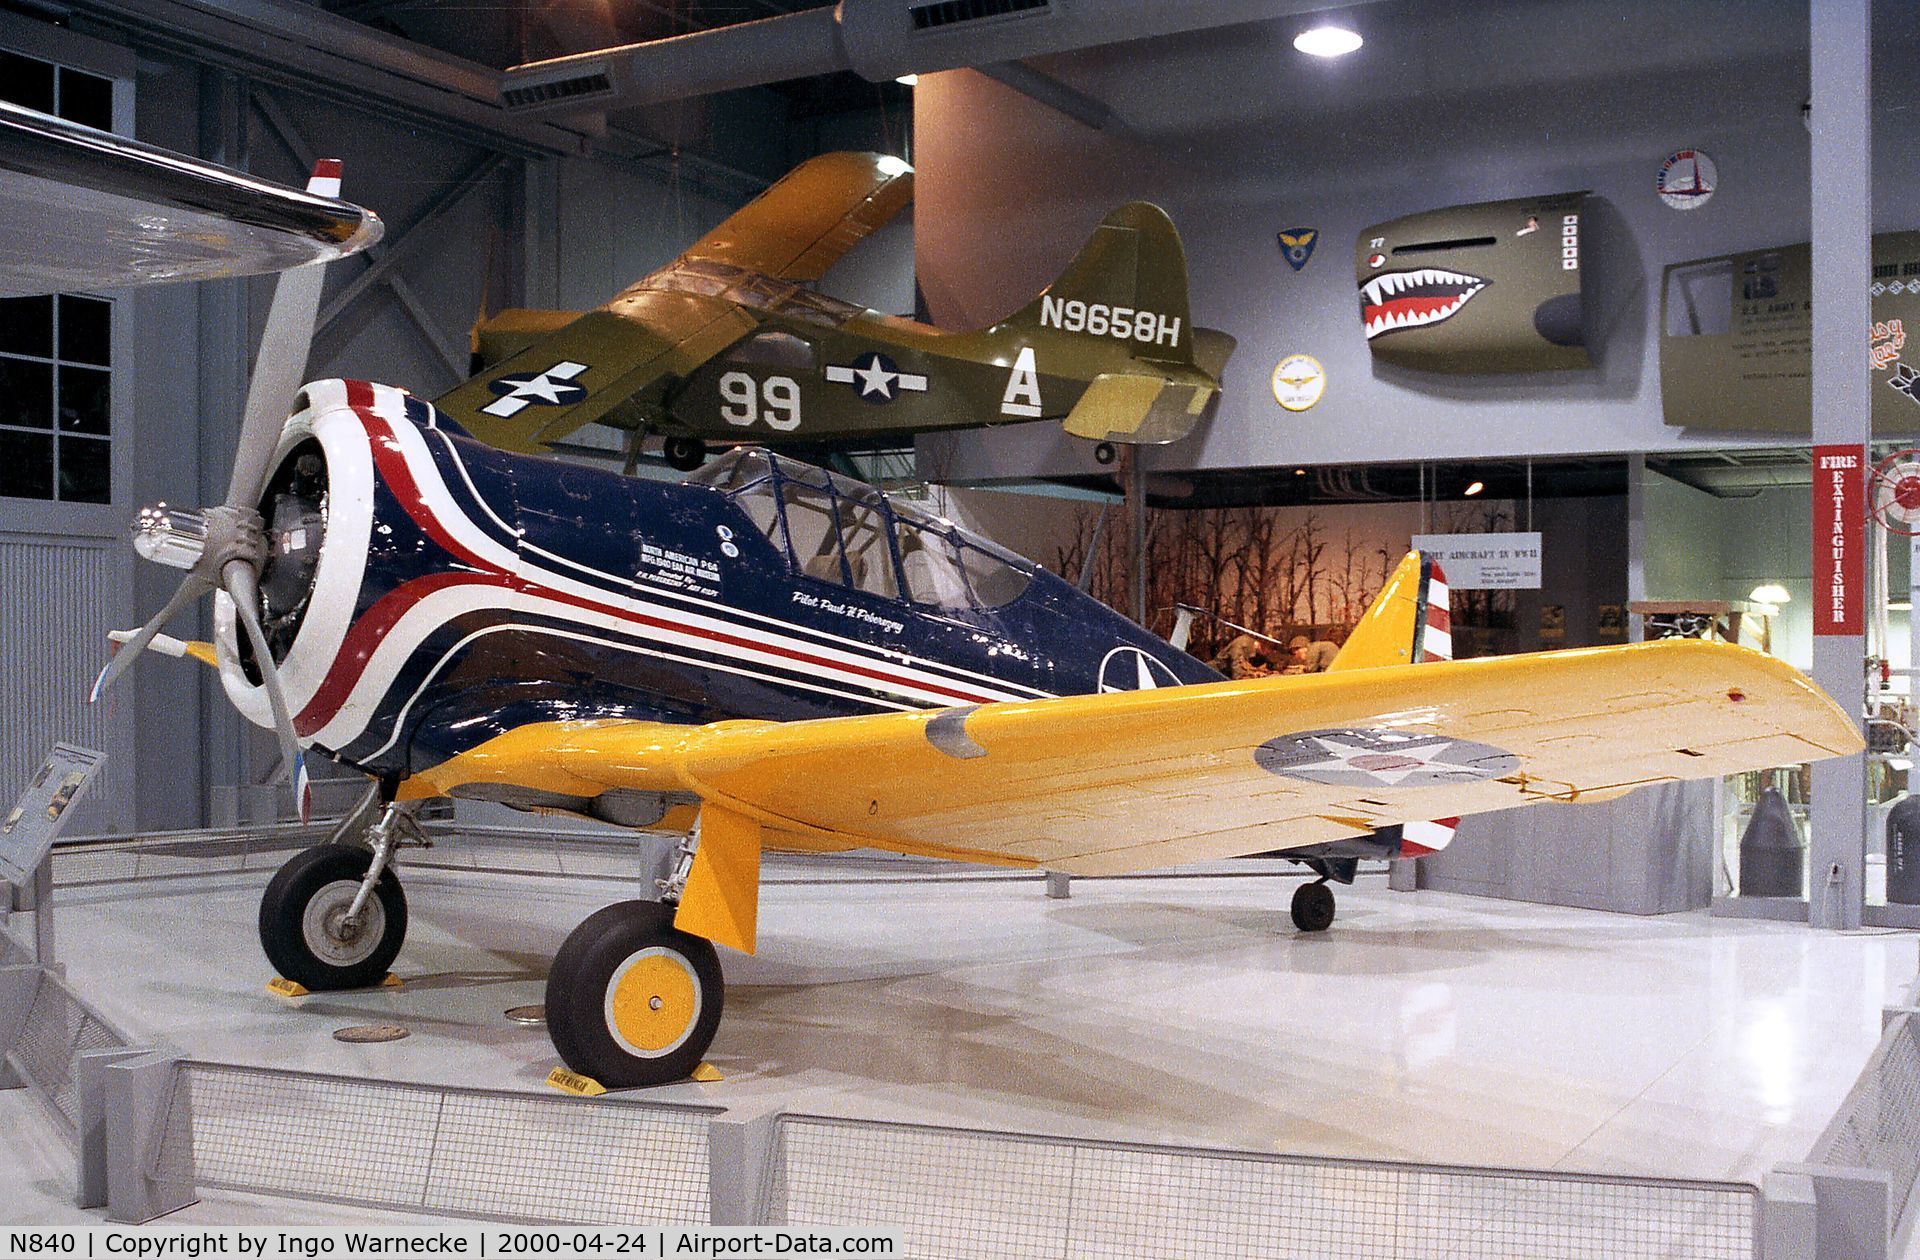 N840, 1940 North American P-64 C/N 68-3061, North American P-64 at the EAA-Museum, Oshkosh WI